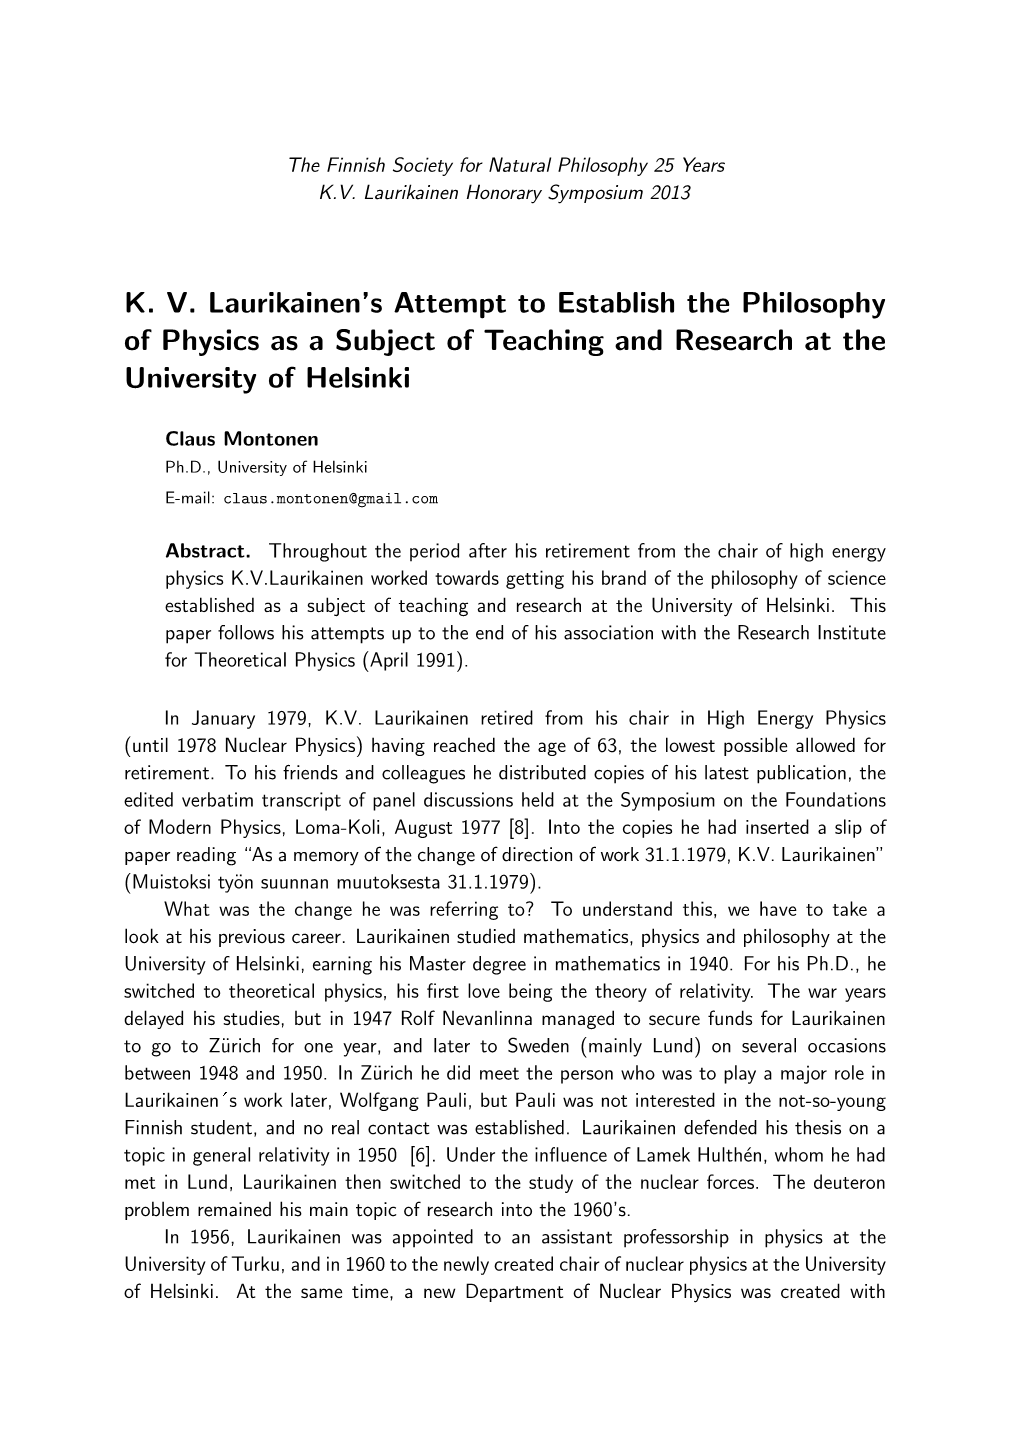 K. V. Laurikainen's Attempt to Establish the Philosophy of Physics